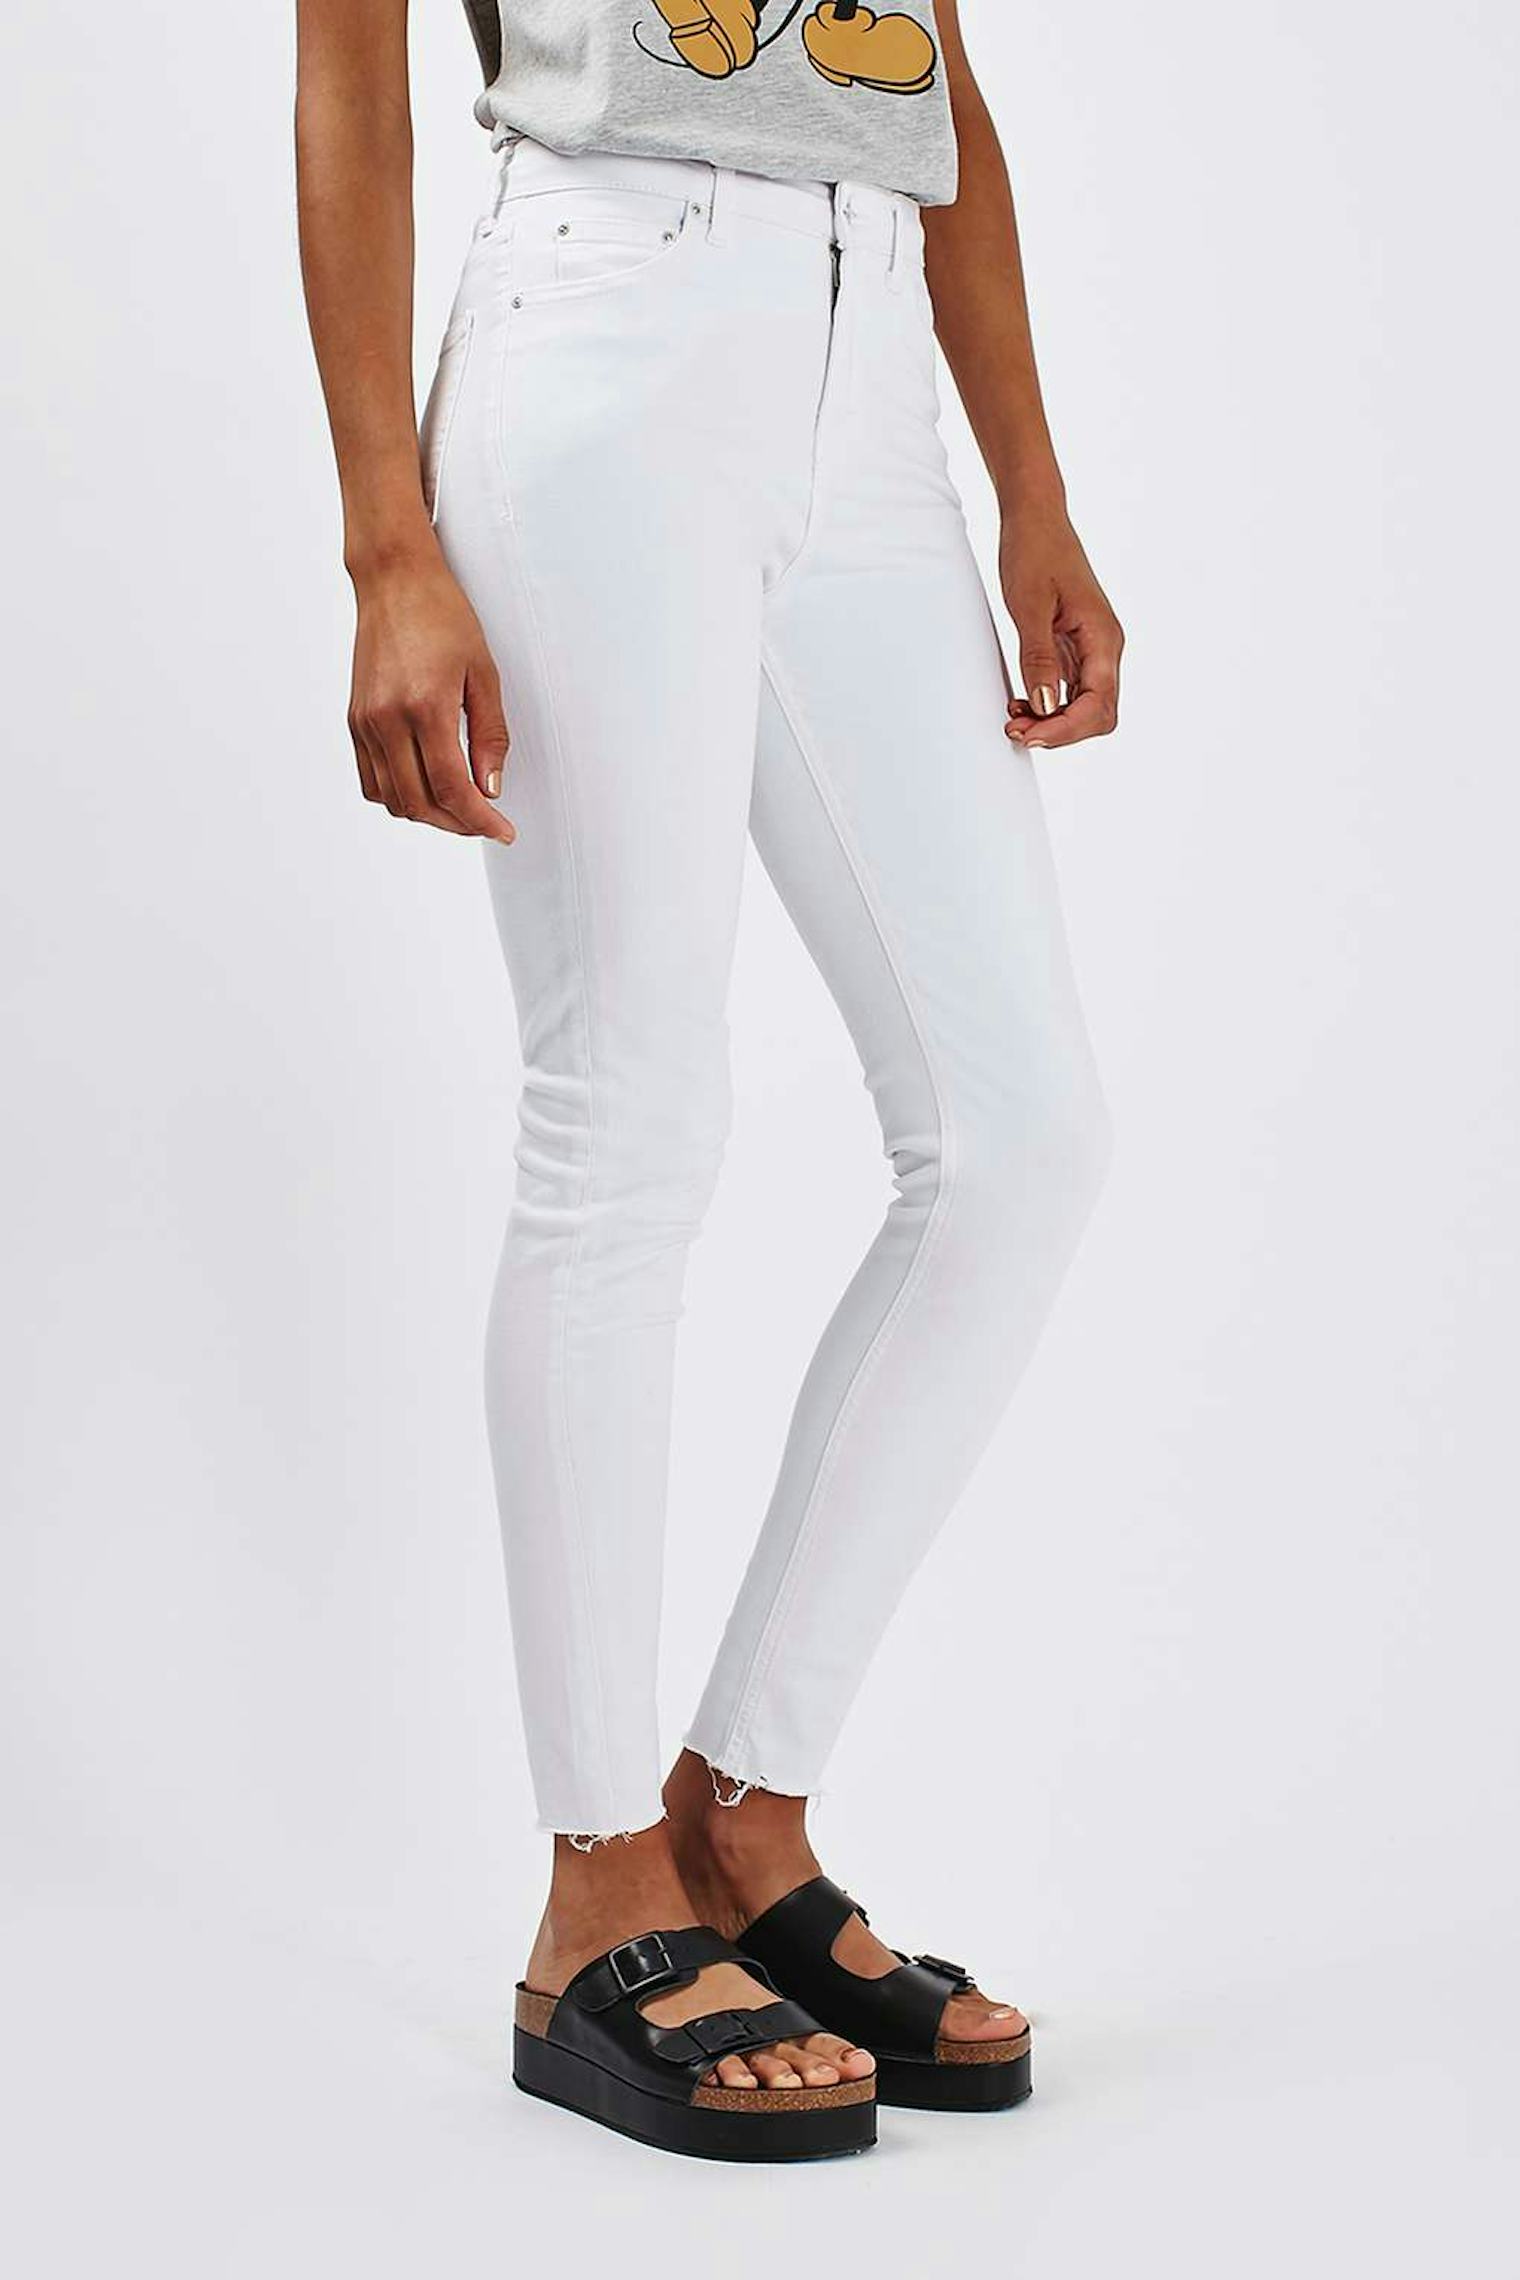 How To Pick Out The Perfect Pair Of White Jeans To Wear All Summer Long